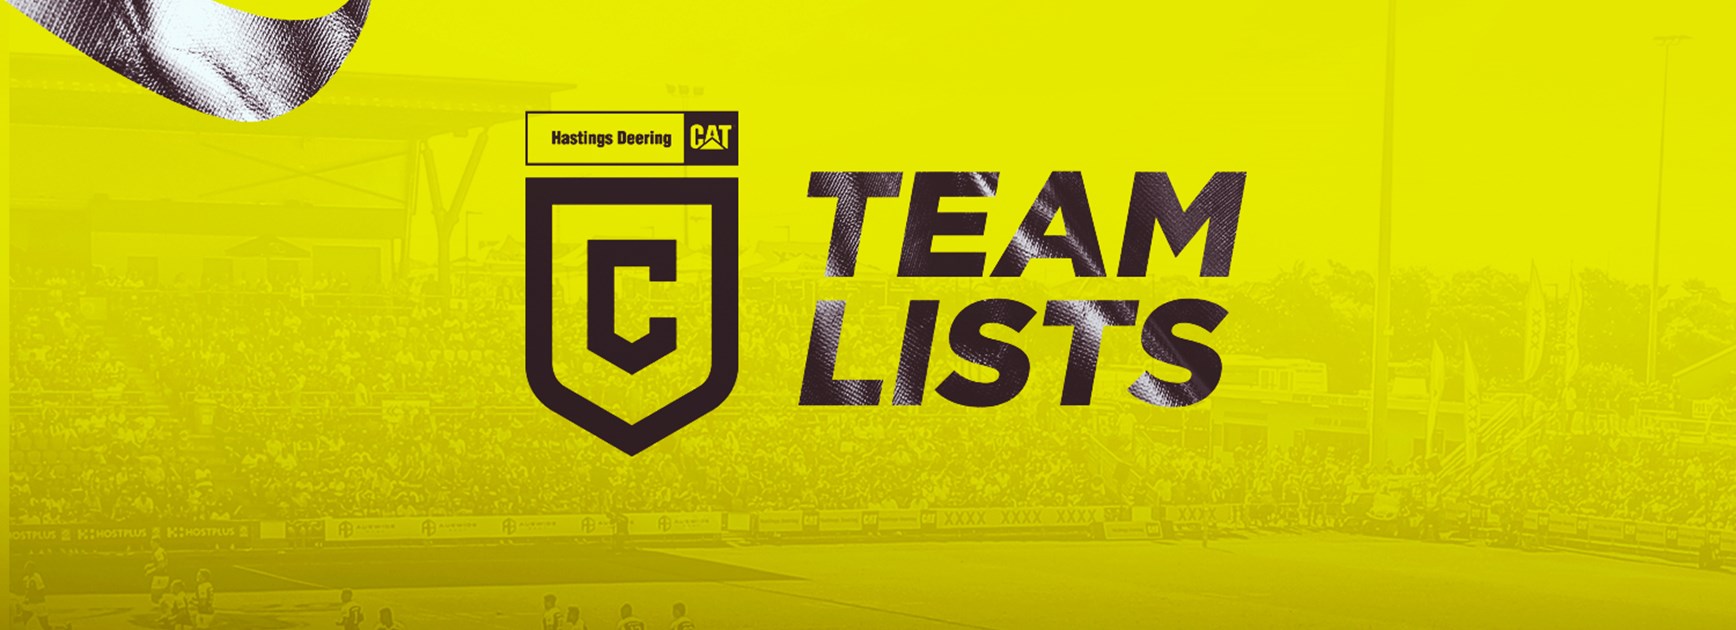 Round 9 Hastings Deering Colts team lists